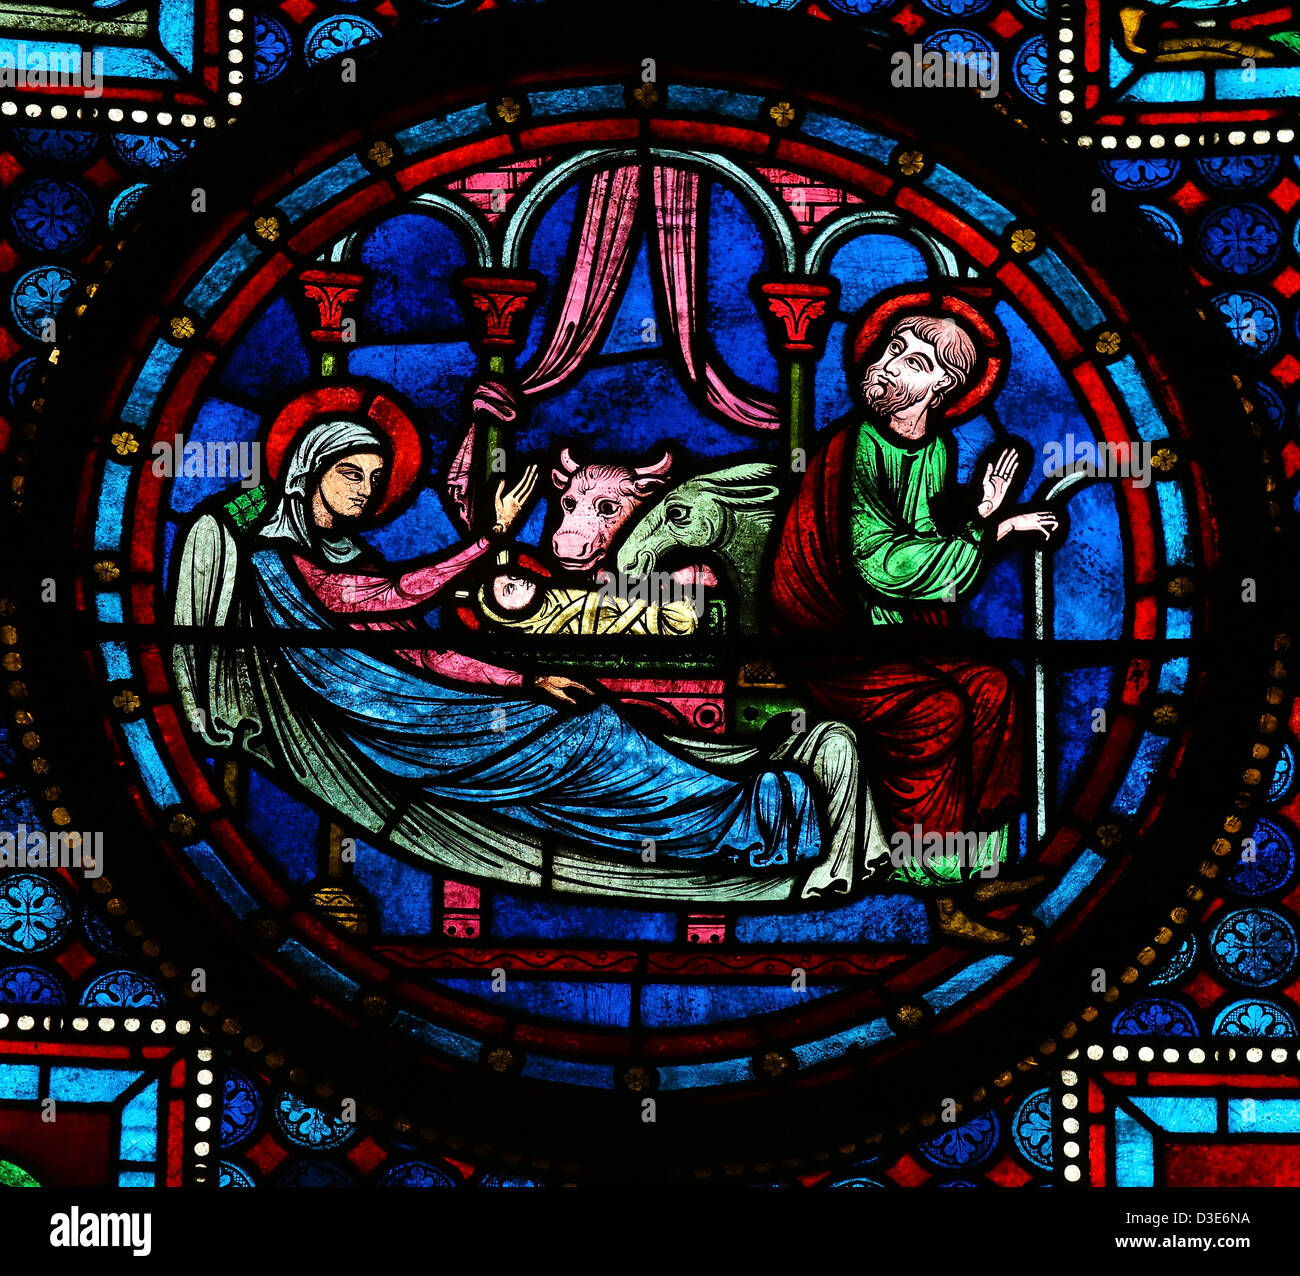 Stained glass window depicting the Holy Family in Bethlehem Stock Photo